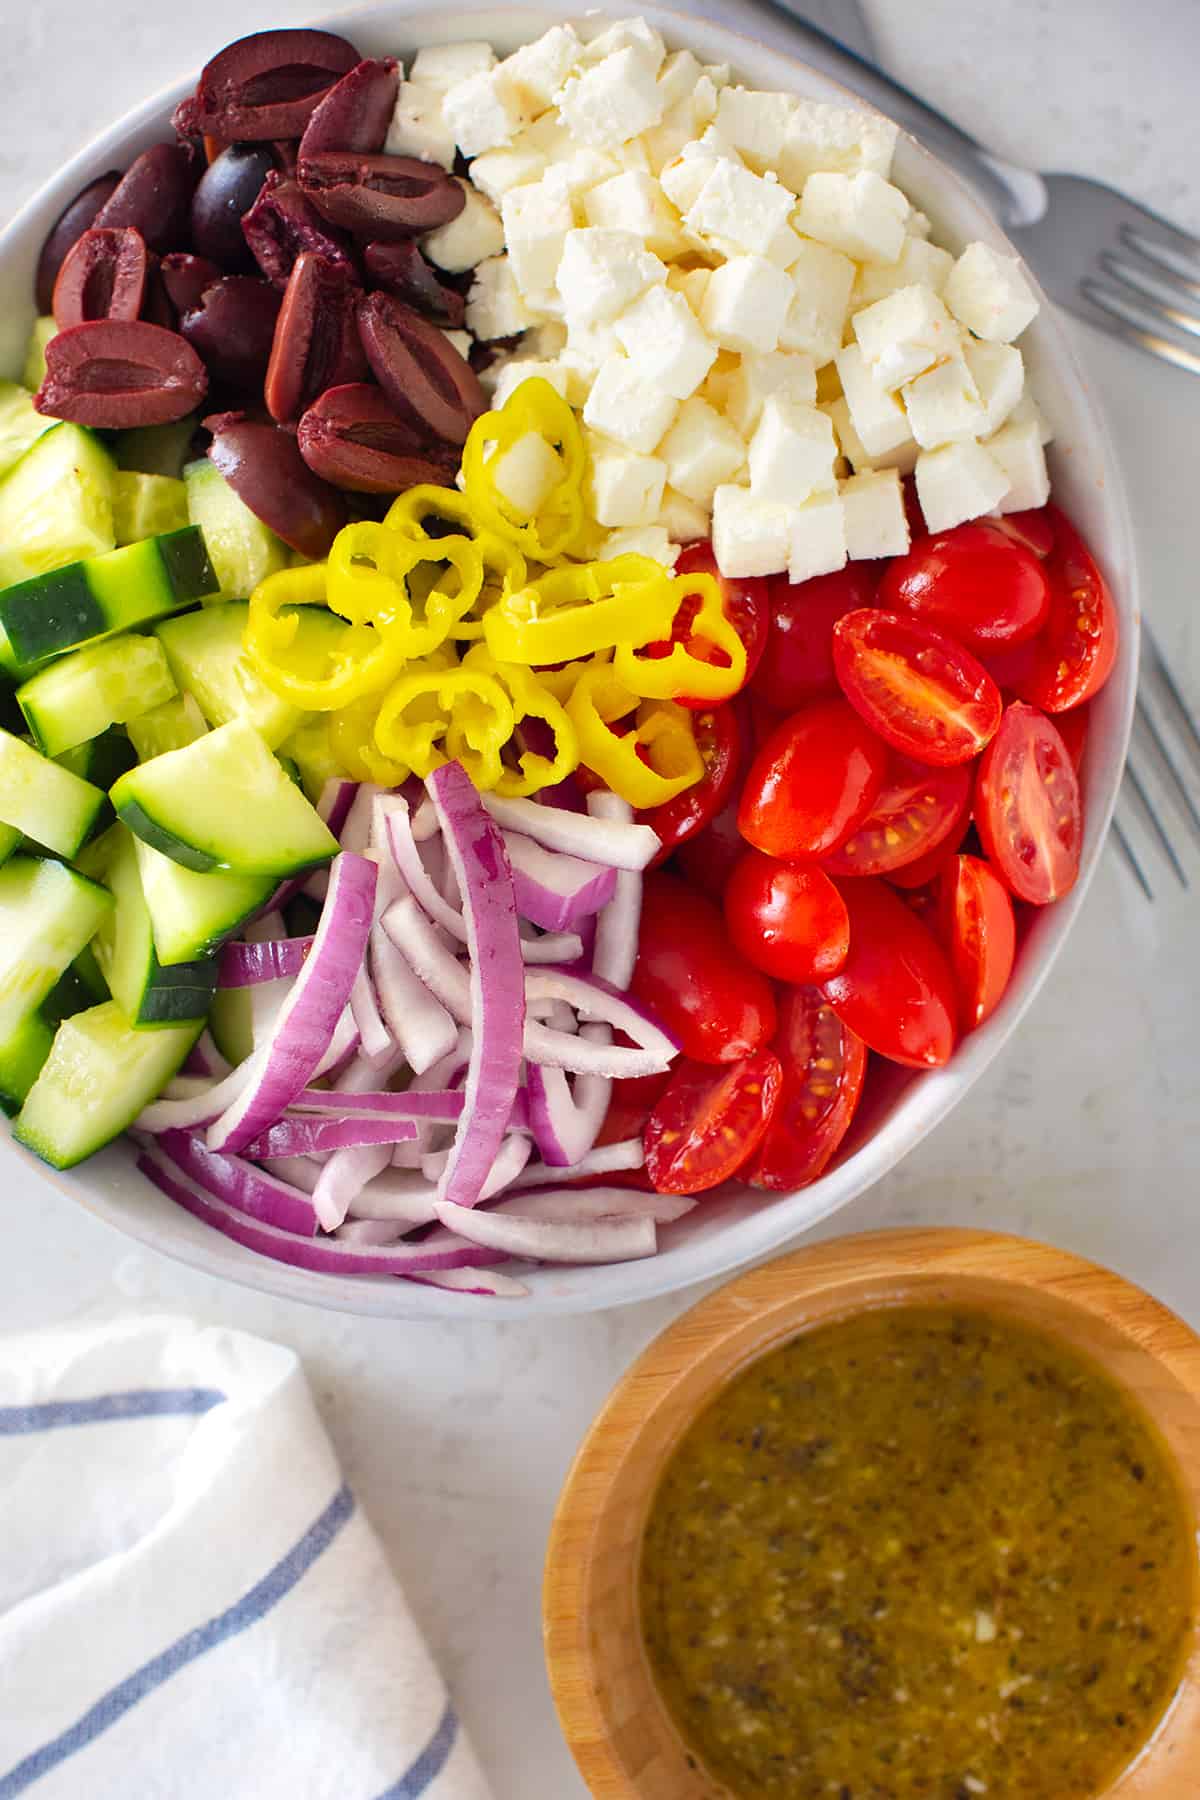 Overhead of vegetables in a chopped salad to show texture and bite sized cuts.